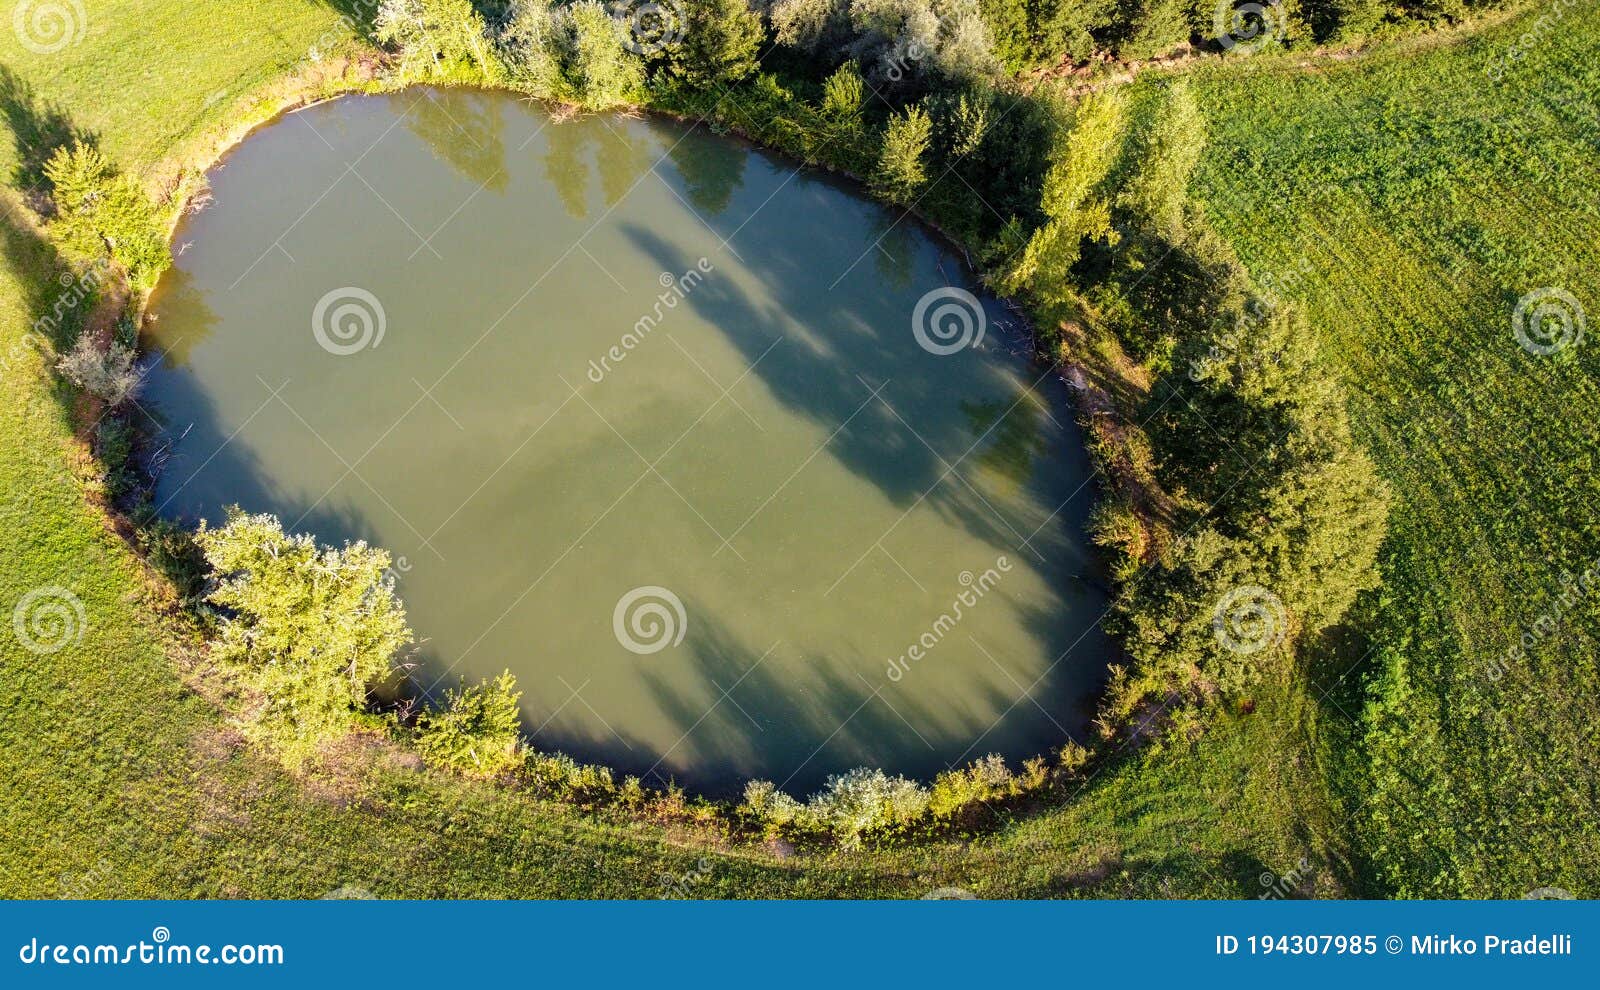 aerial view of a little lake and trees surrounding, in italian appennini hills